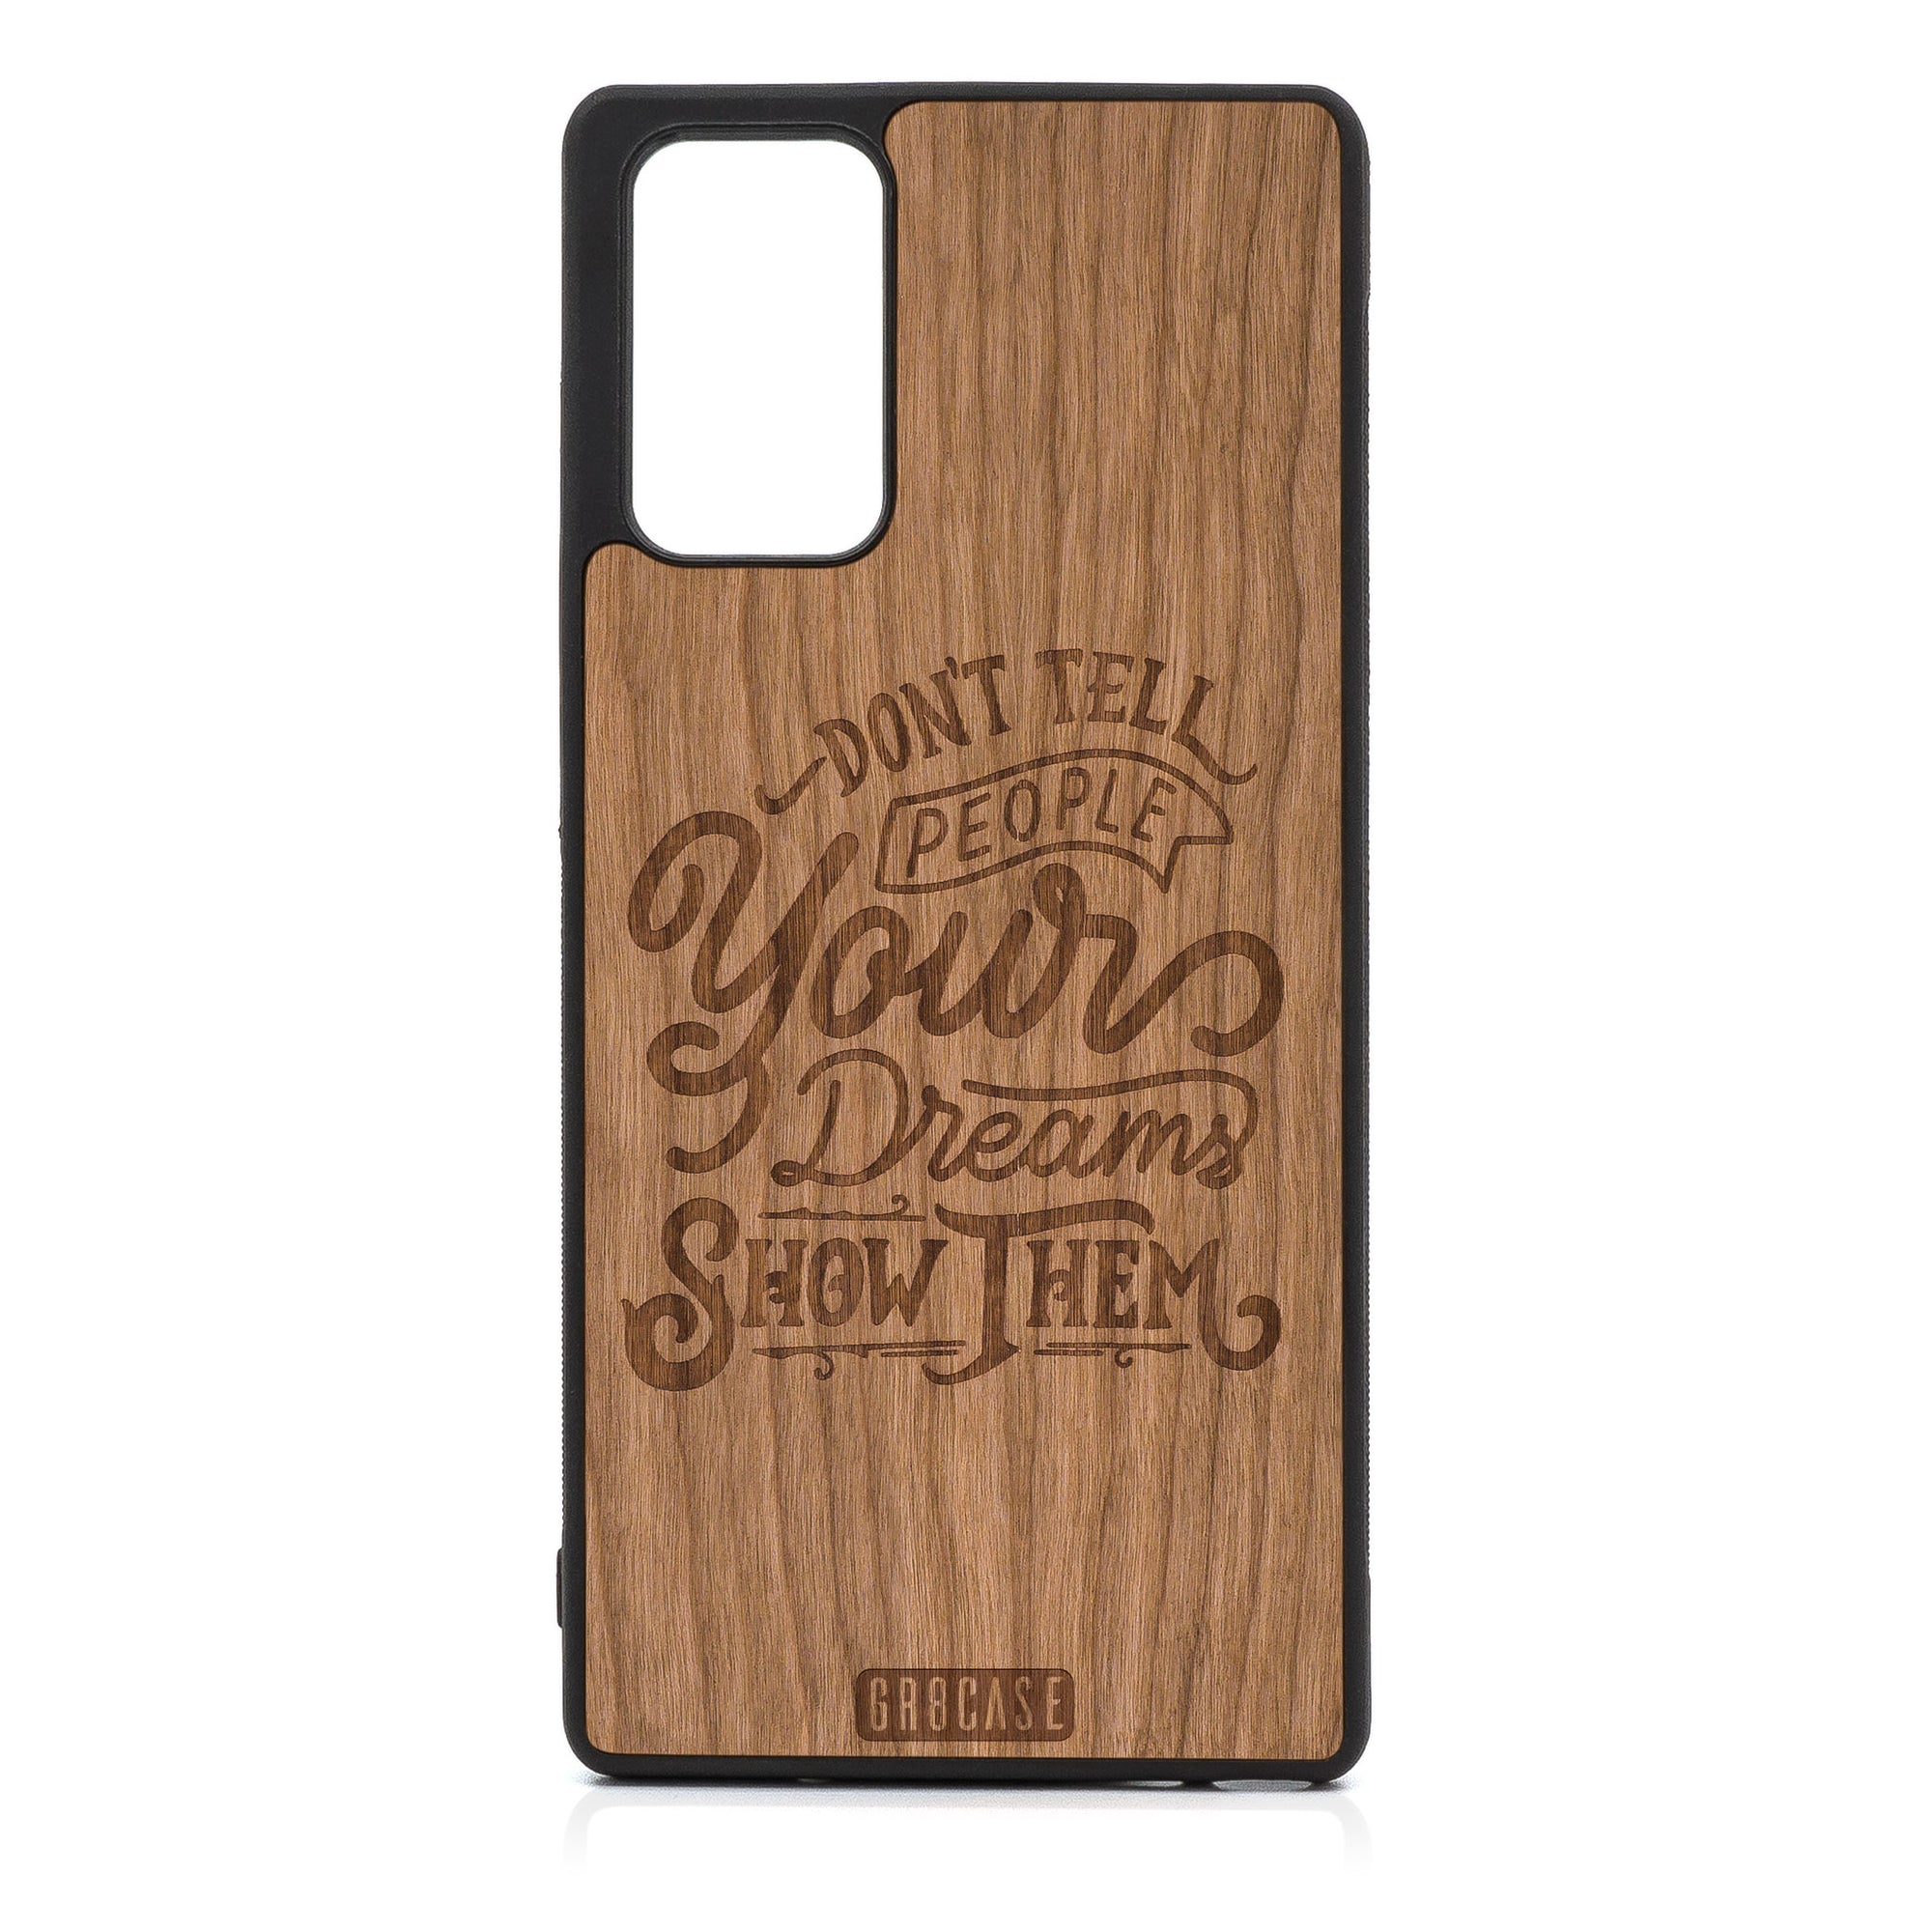 Don't Tell People Your Dreams Show Them Design Wood Case For Samsung Galaxy Note 20